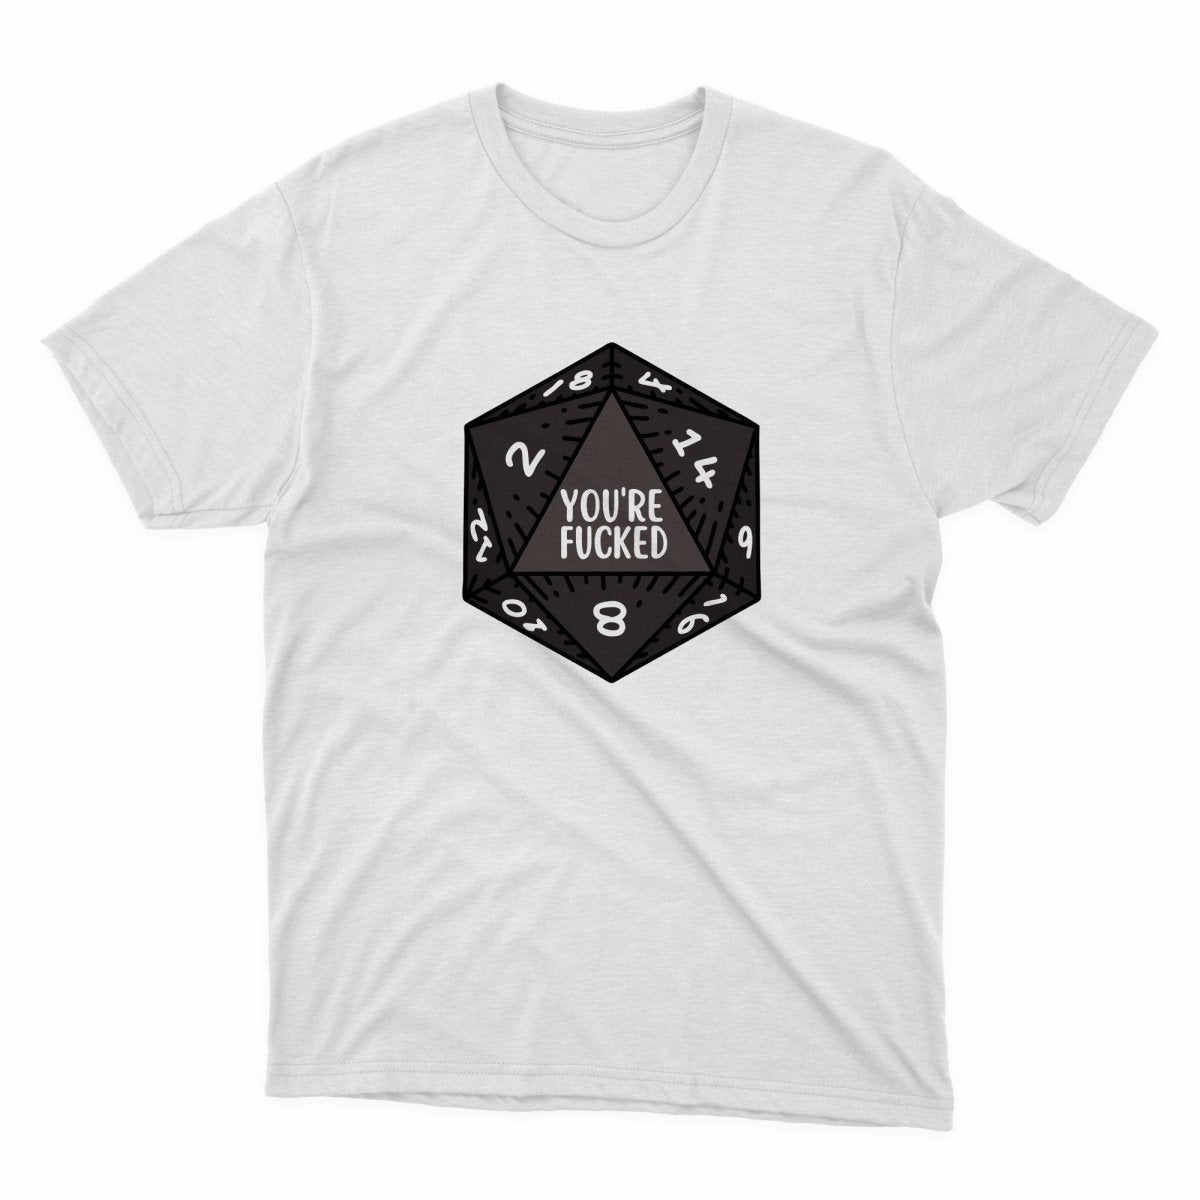 You're Fucked Dice Shirt - stickerbullYou're Fucked Dice ShirtShirtsPrintifystickerbull10621506670745431995WhiteSa white t - shirt with a black d20 dice on it